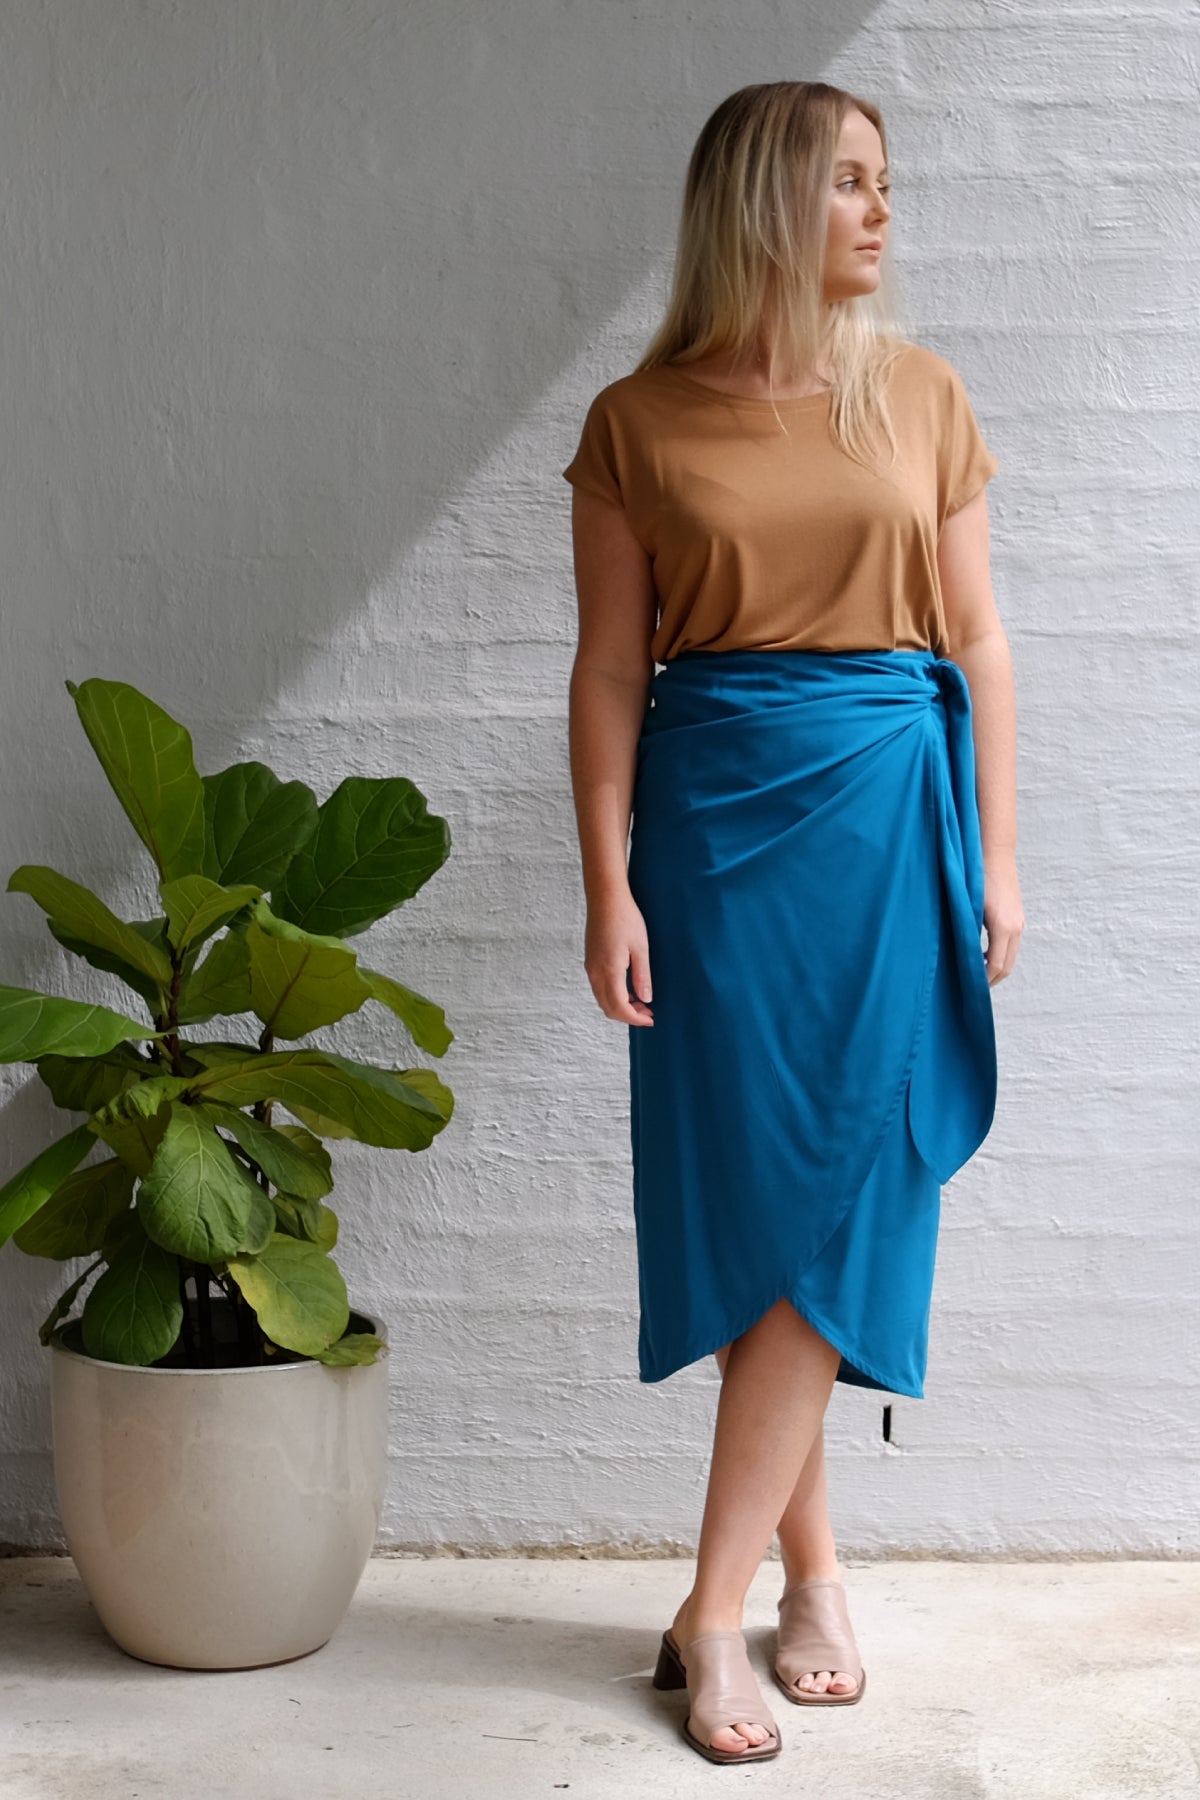 Learn How to Make a Simple Sarong - Threads